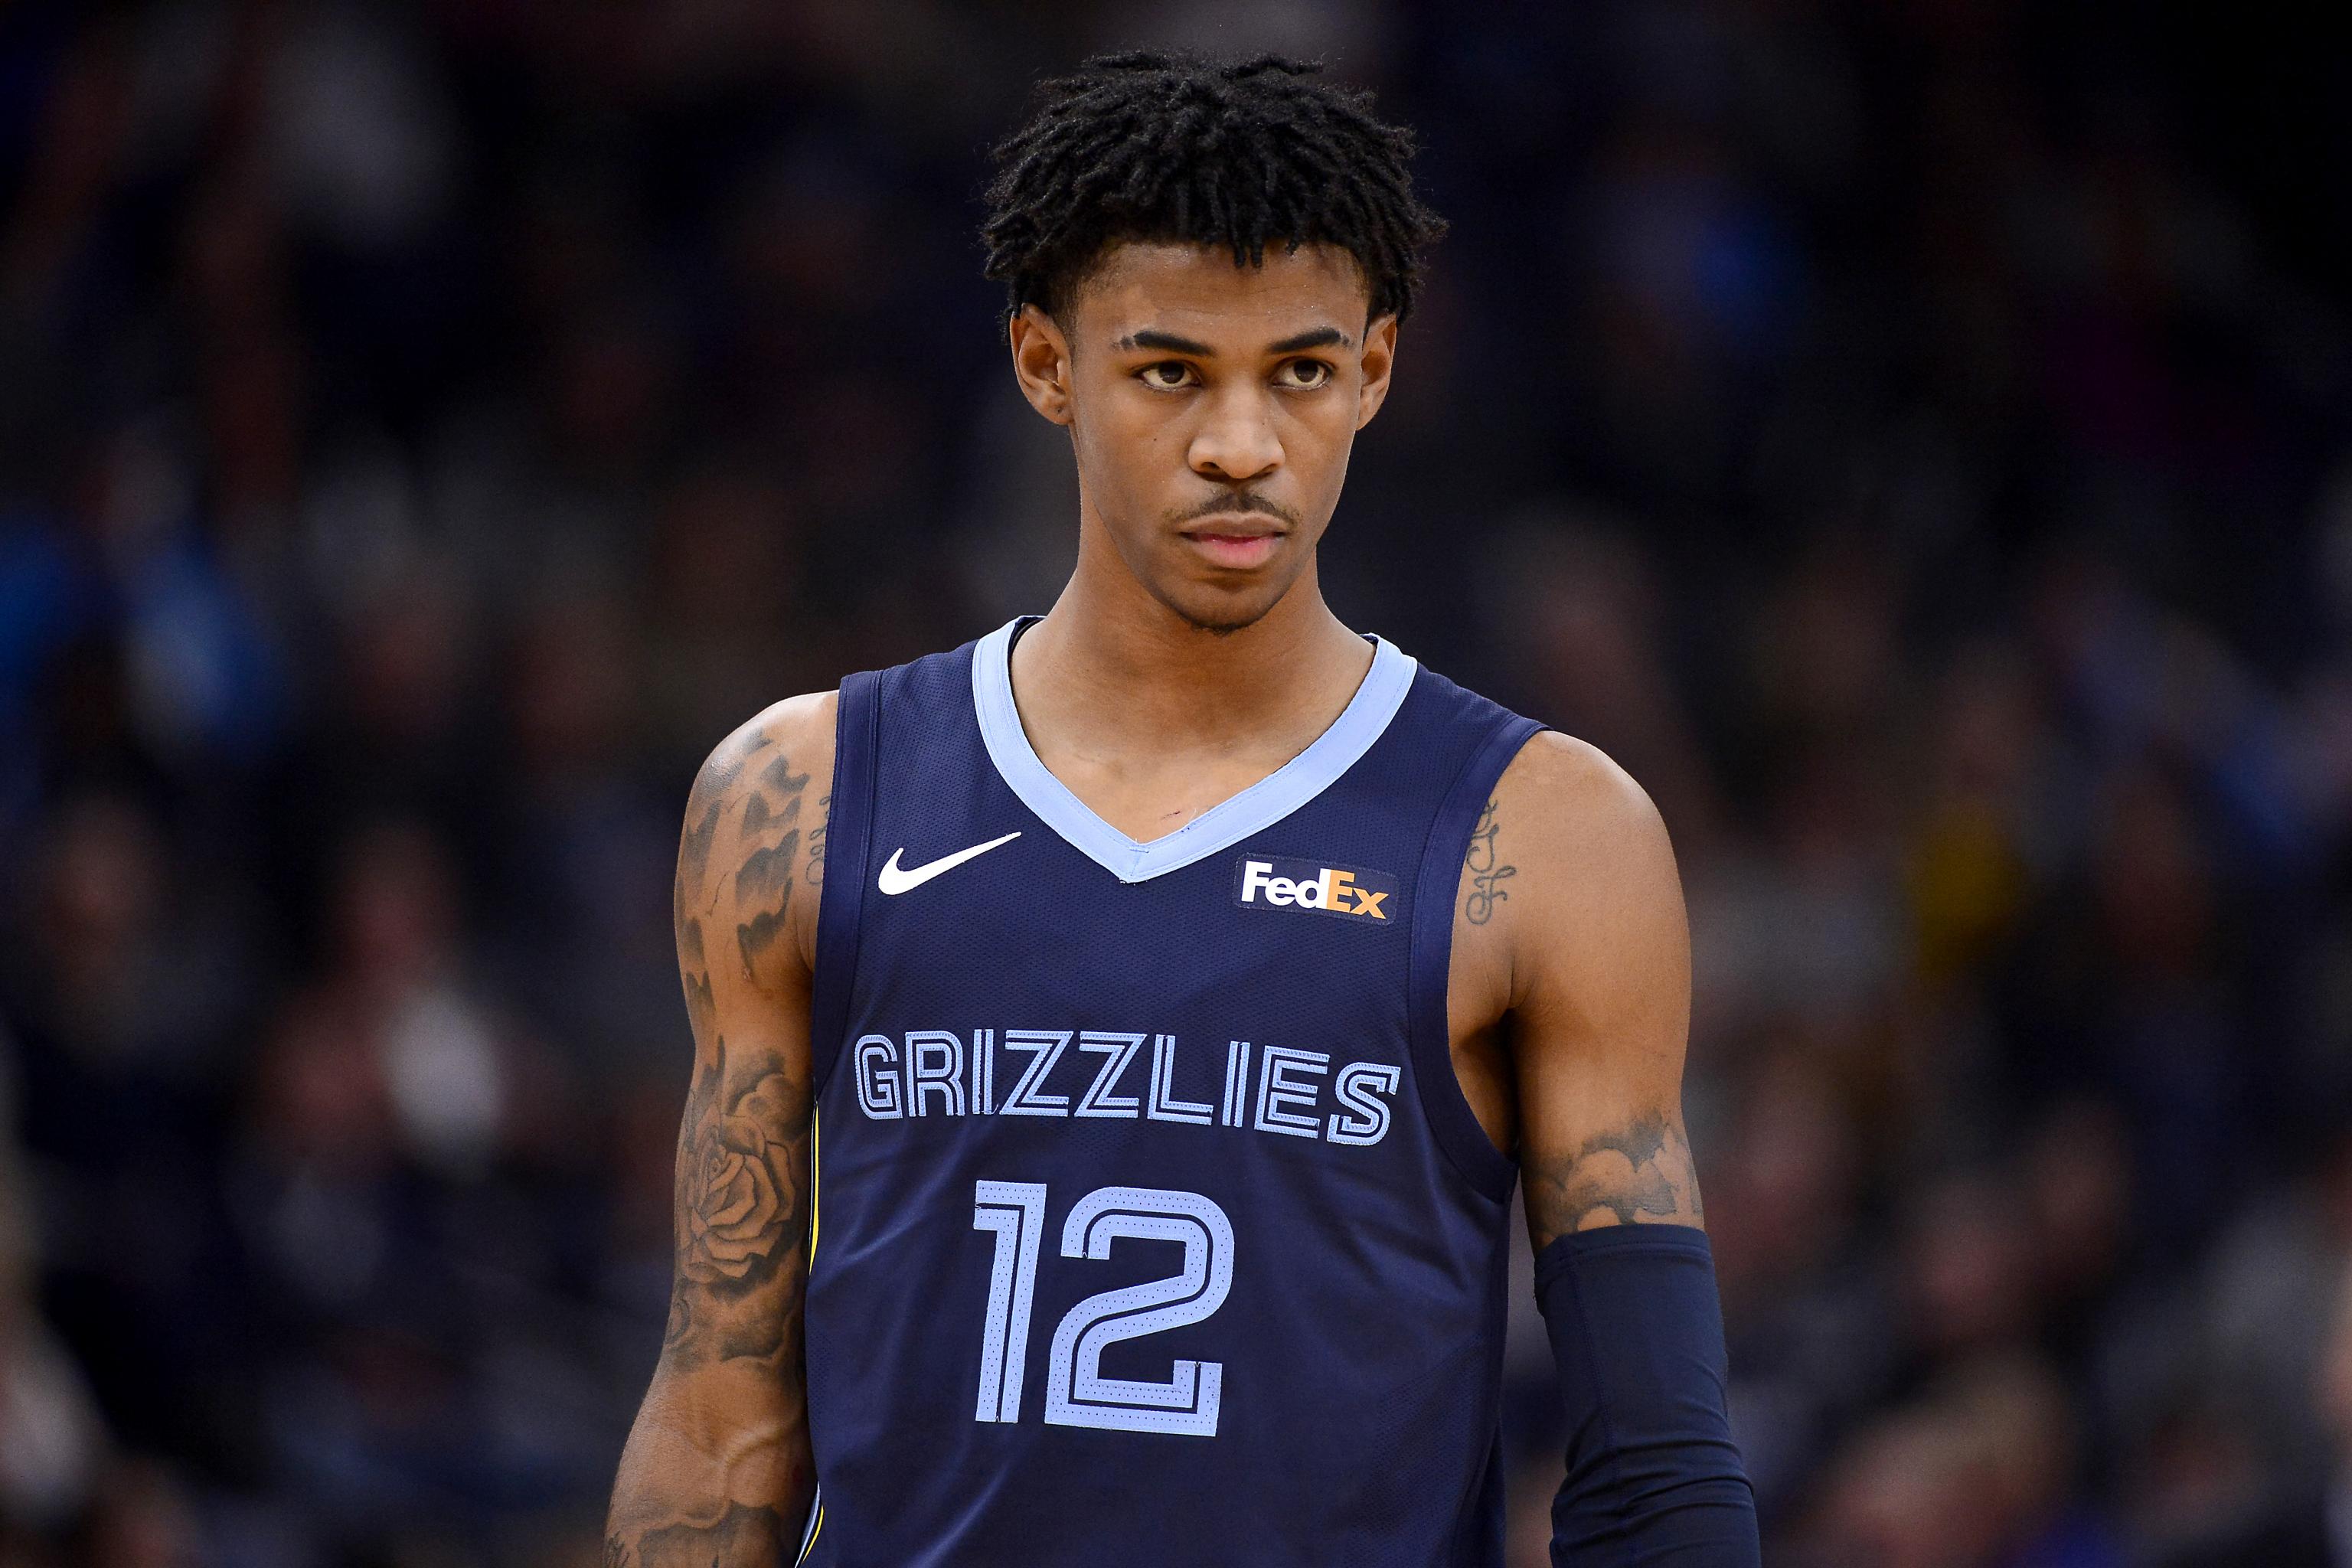 Grizzlies' Ja Morant on Missed Dunk Attempt over Kevin Love: 'He